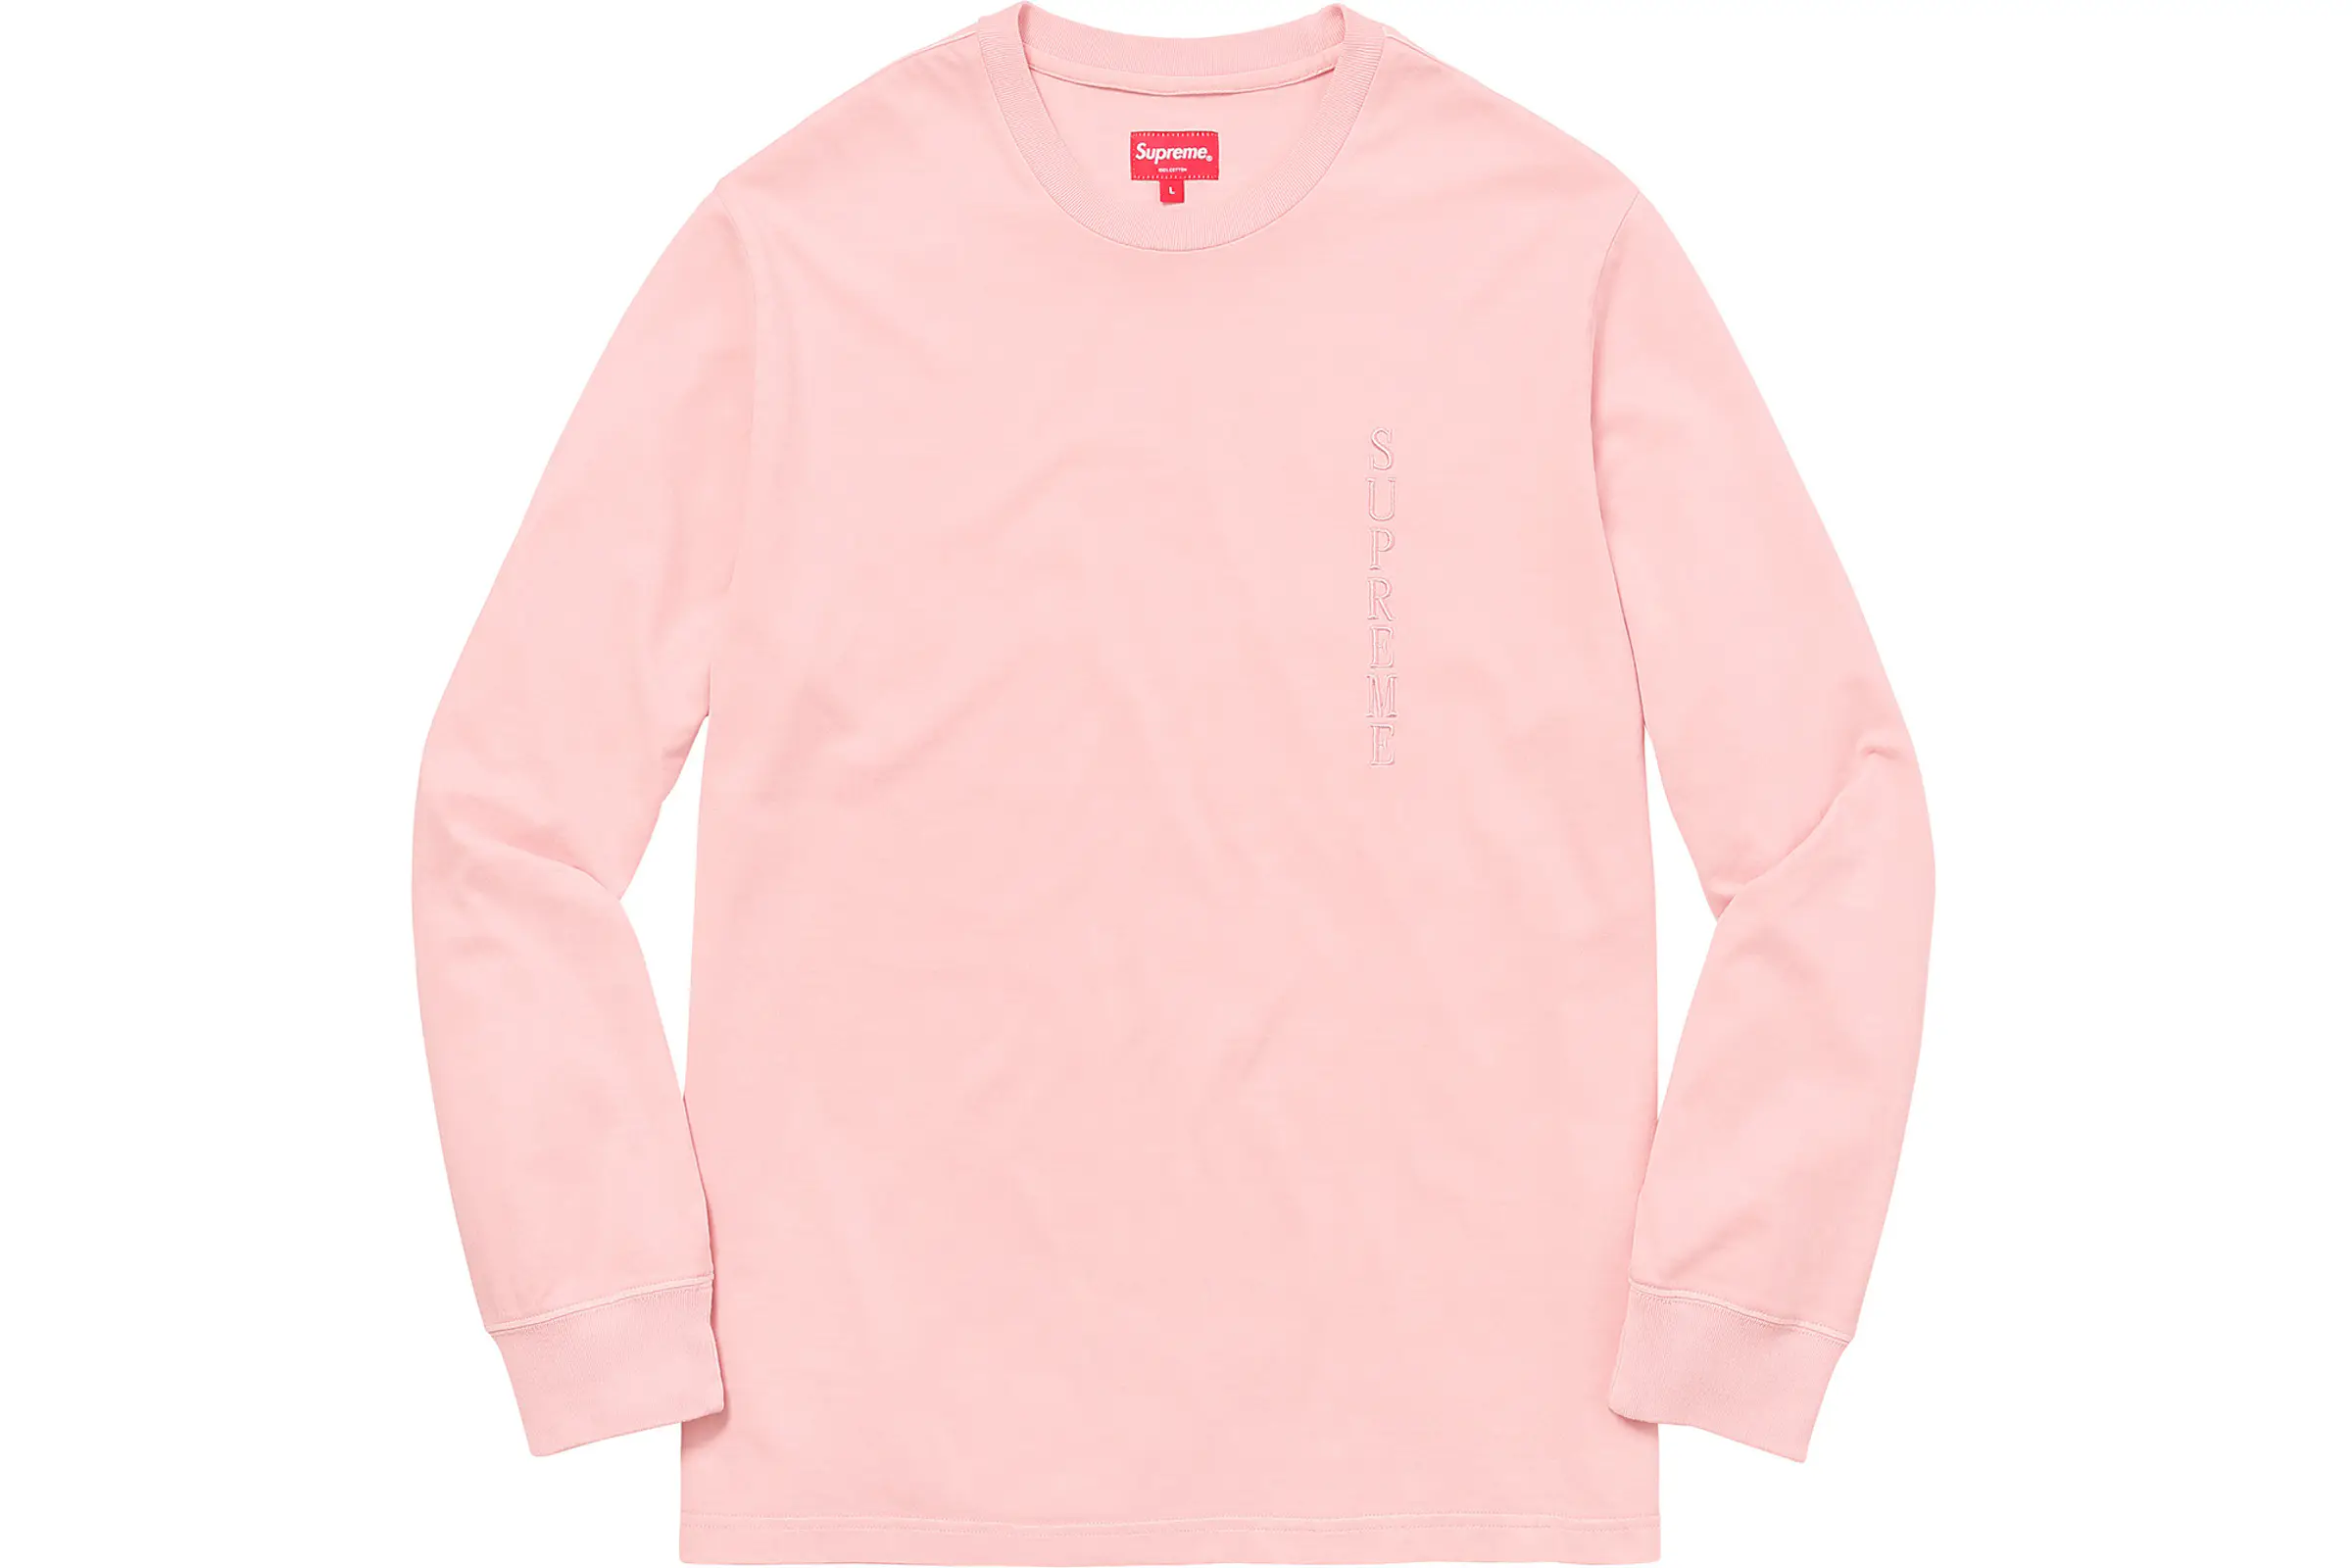 Supreme Overdyed L/S Top Pink - FW17 - MX